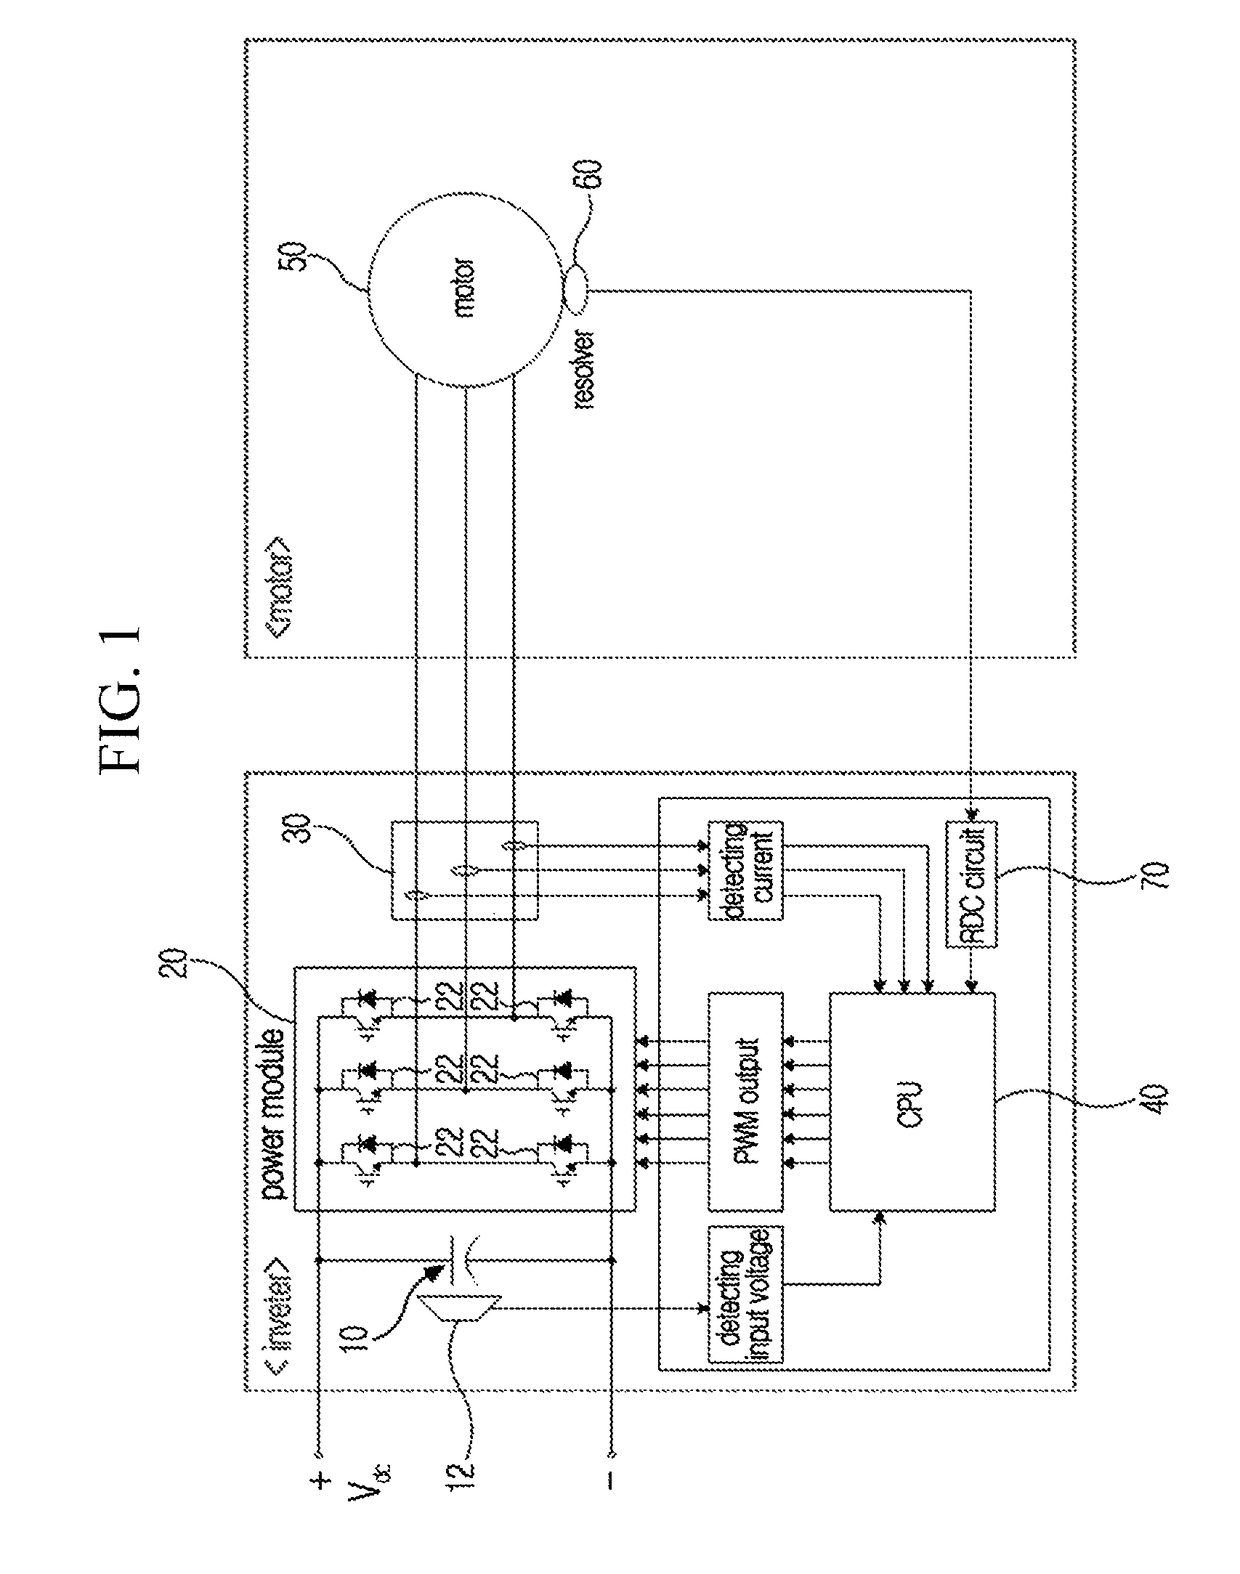 System for controlling motor of hybrid electric vehicle